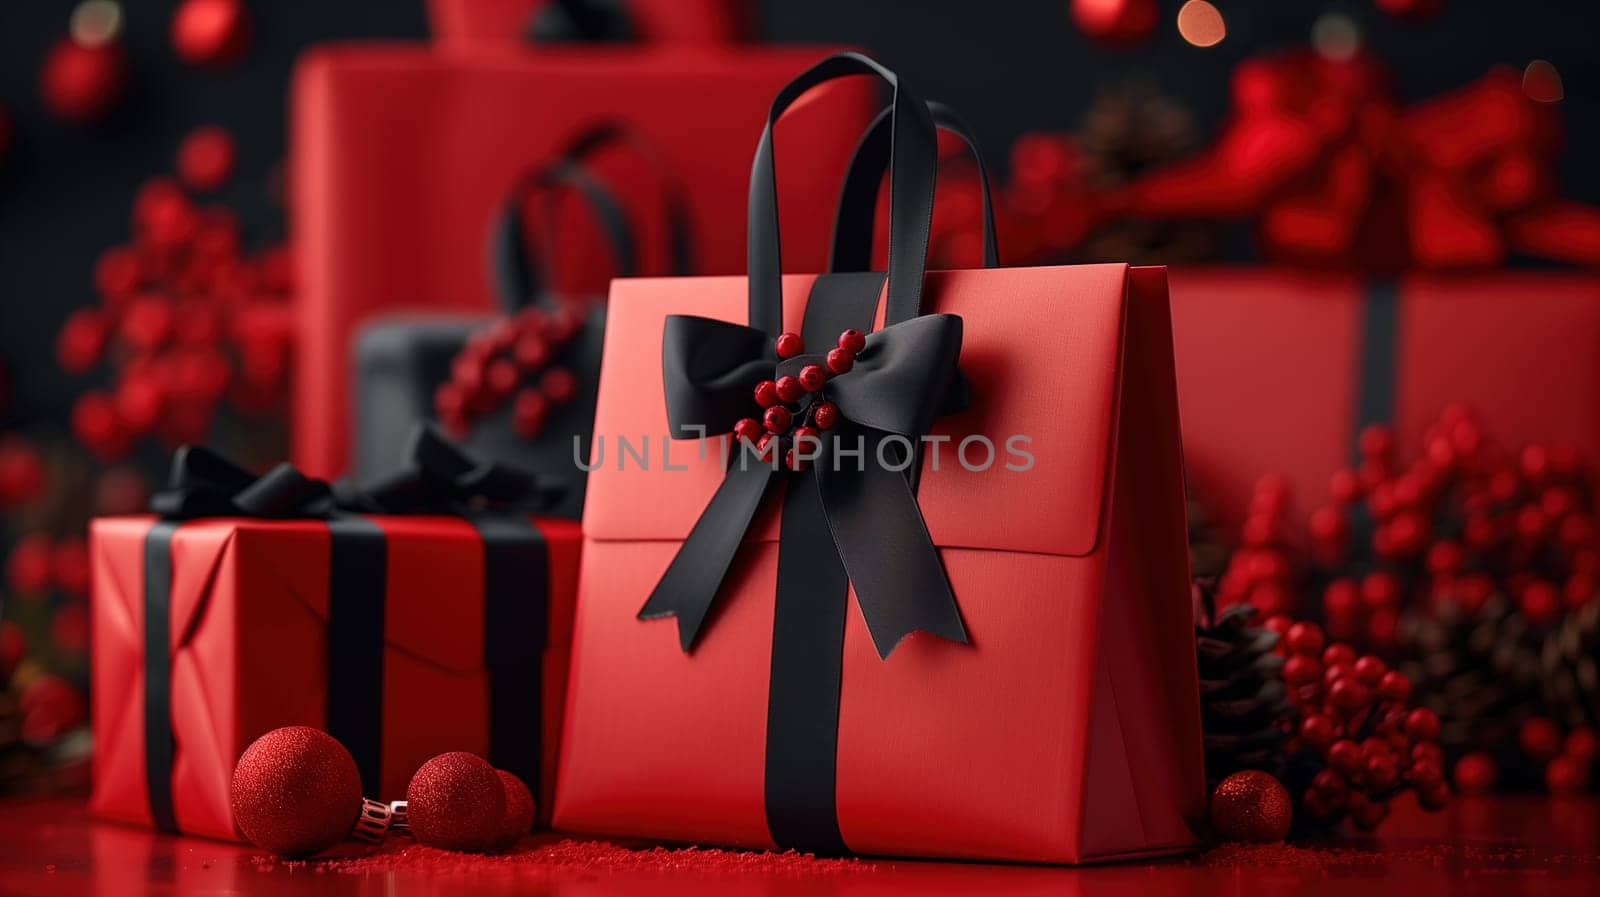 Several red boxes with black bows arranged in a group, showcasing a sale concept or a Black Friday promotion. The boxes are neatly stacked or scattered, adding a festive touch to the scene.